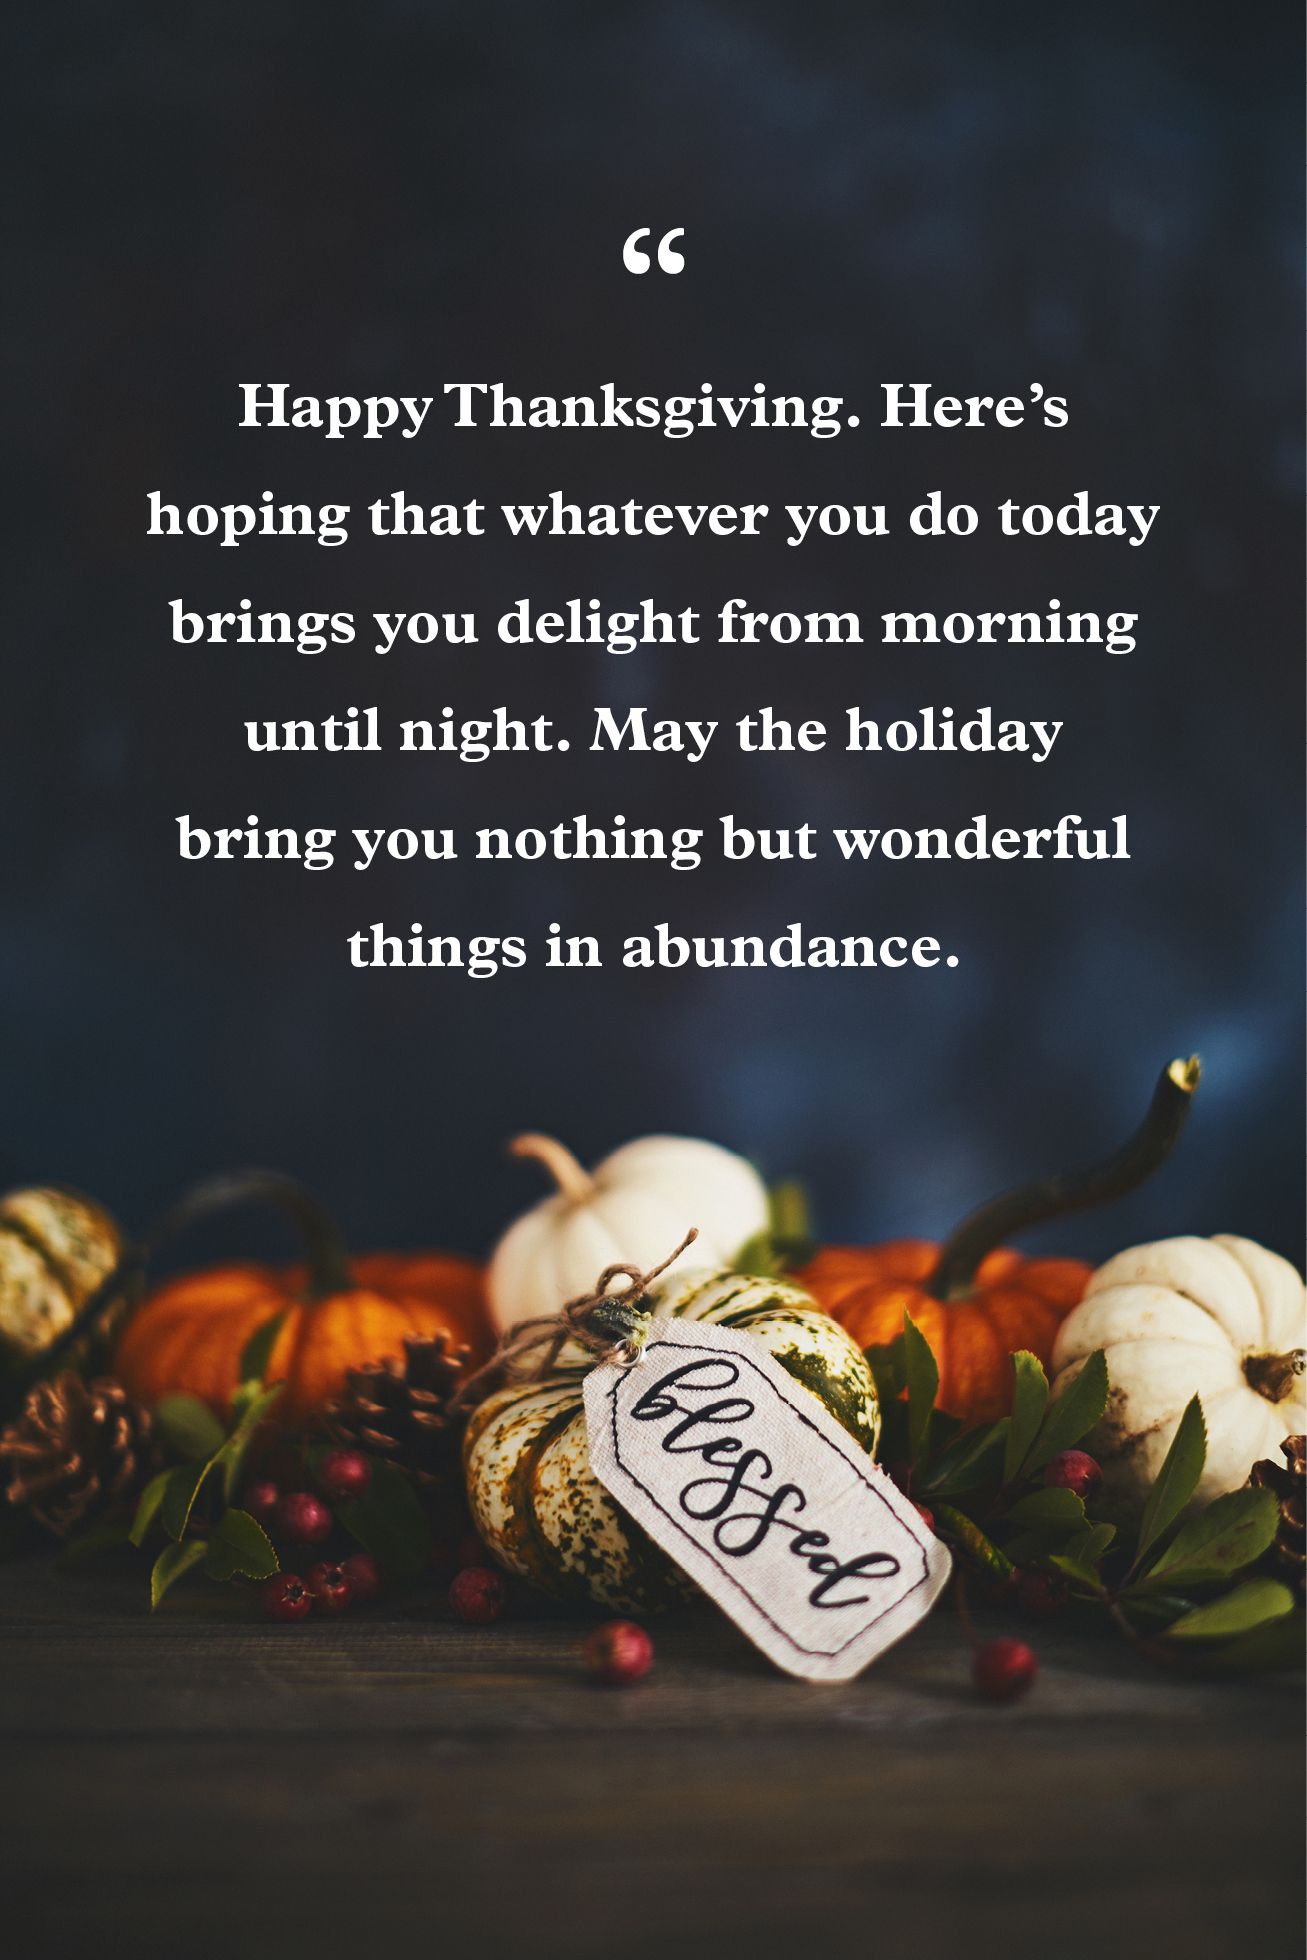 40 Thanksgiving Greetings - What to Write in a Thanksgiving Card